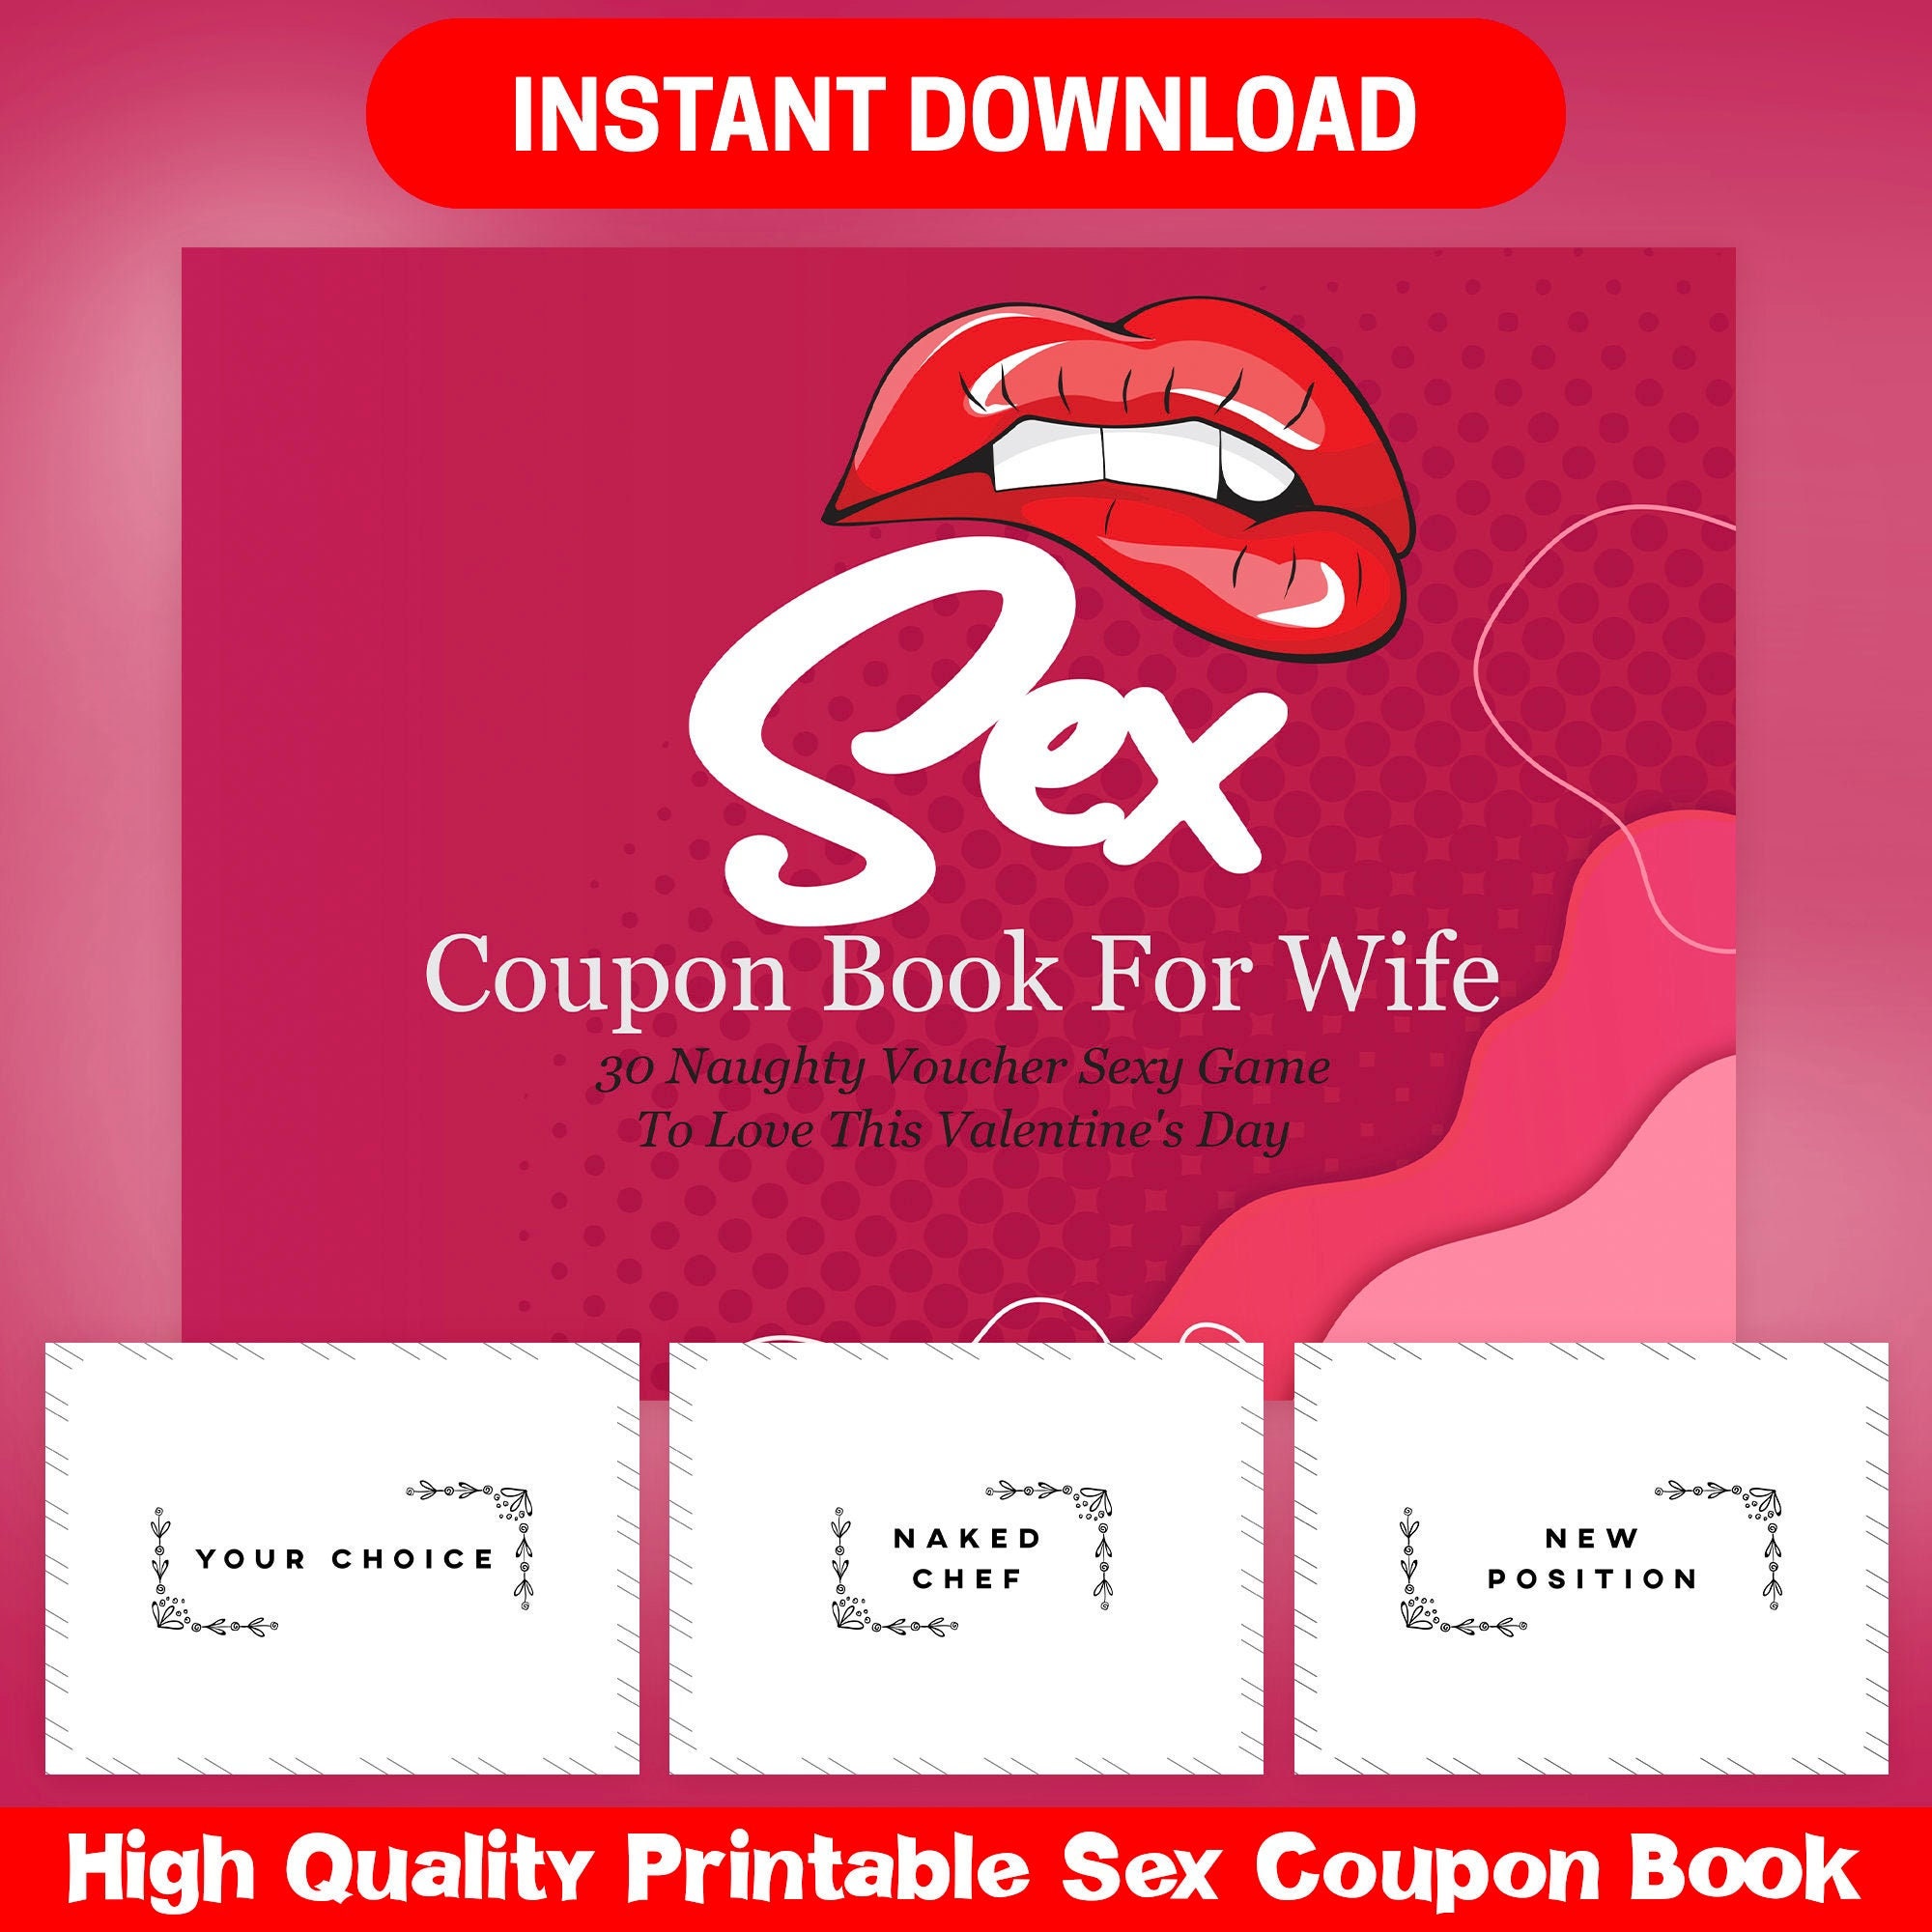 BEST VALUE 30 Sex Coupon Book for Wife Instant Download image image